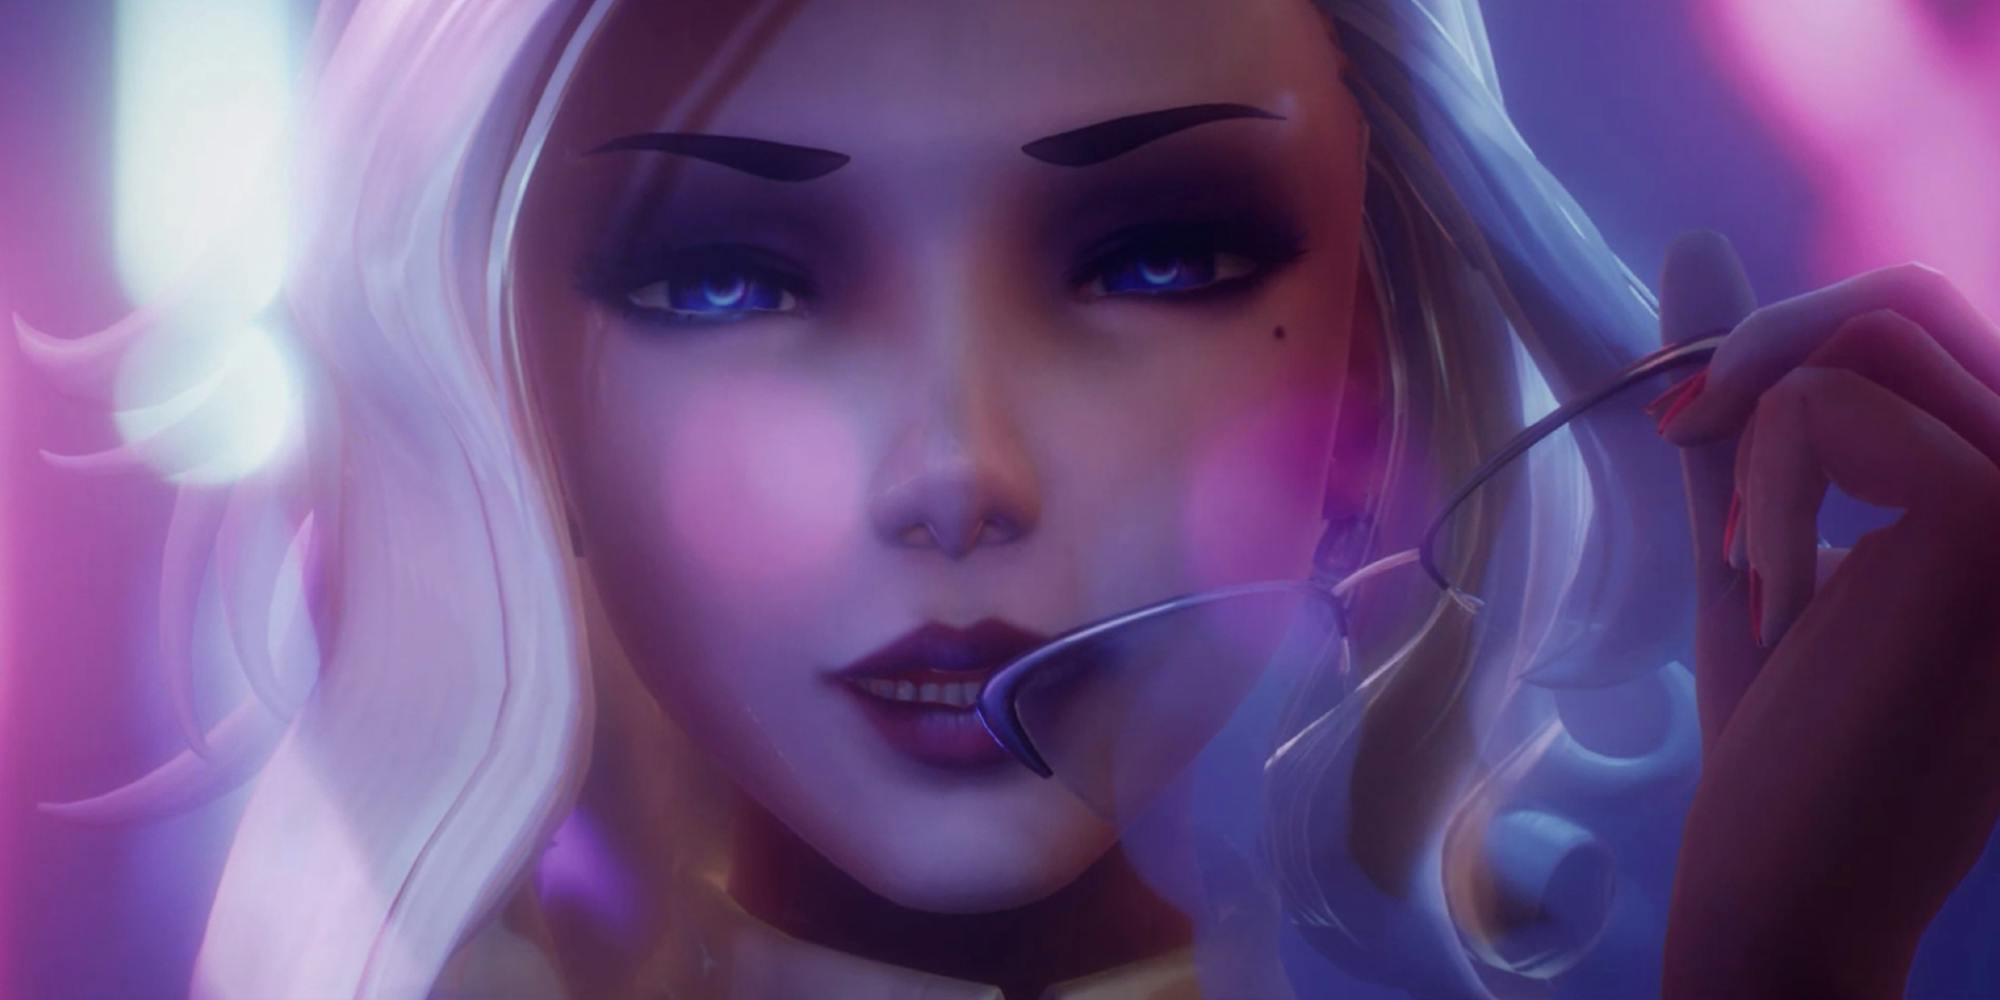 Everything you need to know about Subverse, the hottest adult game yet